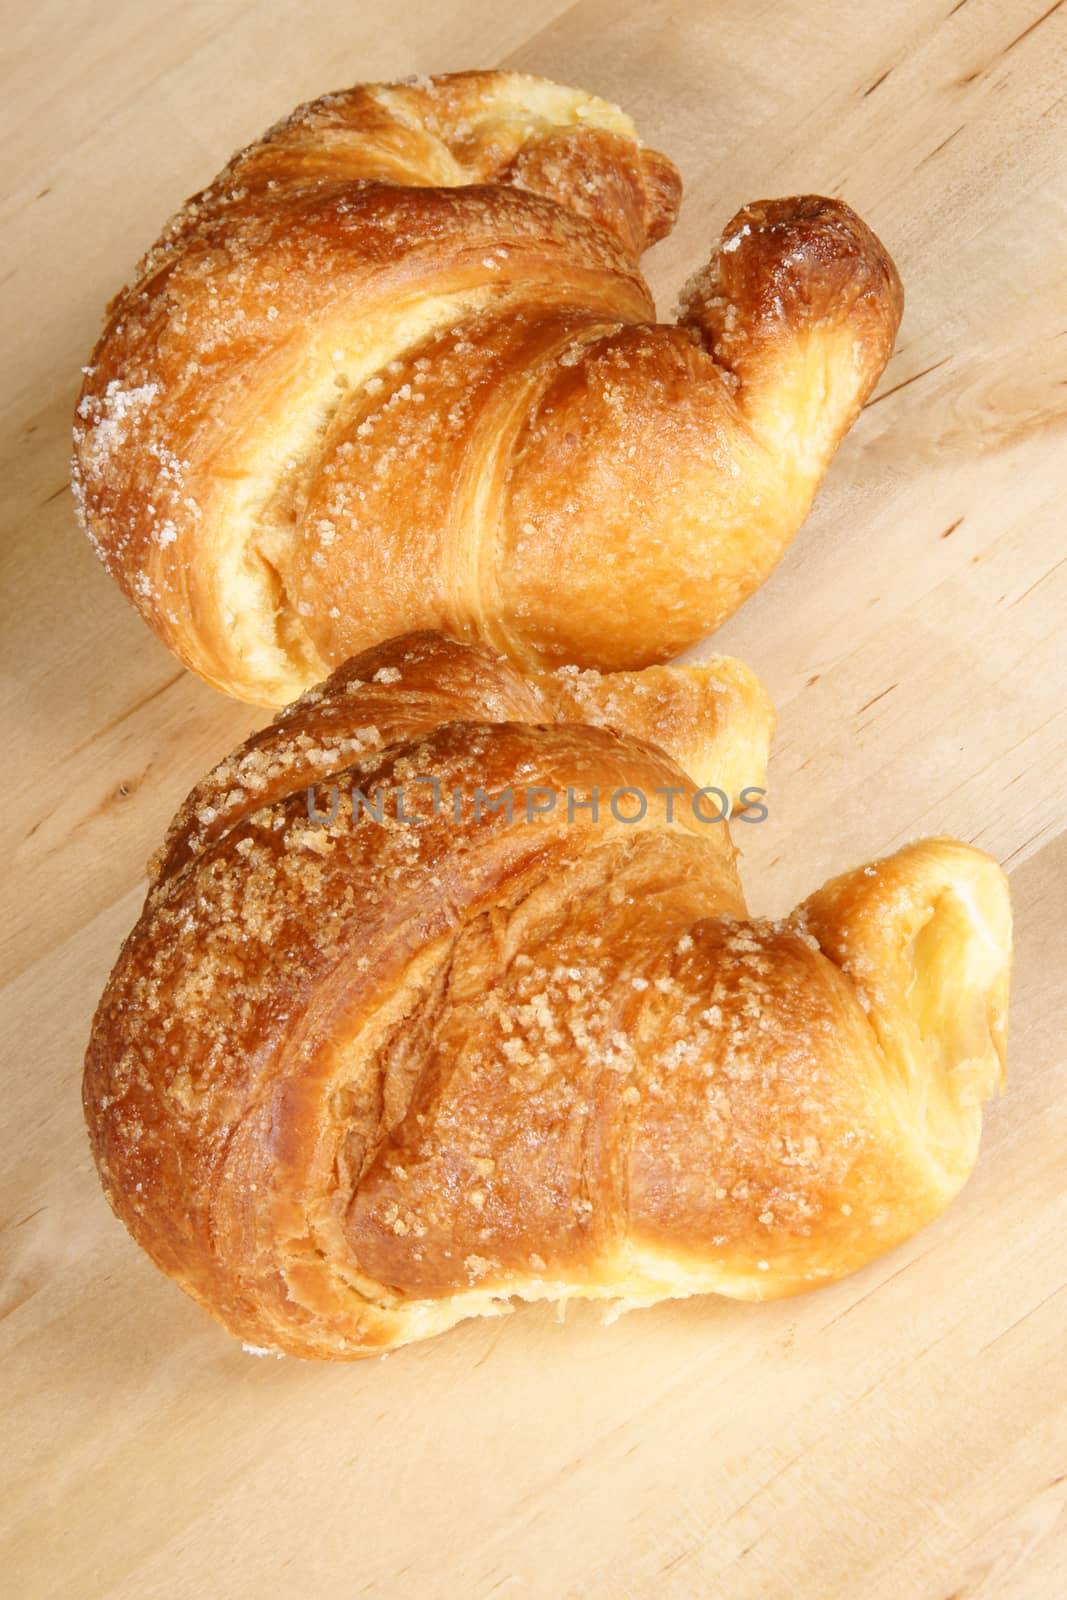 Two freshly baked croissants with granulated sugar over a wooden table